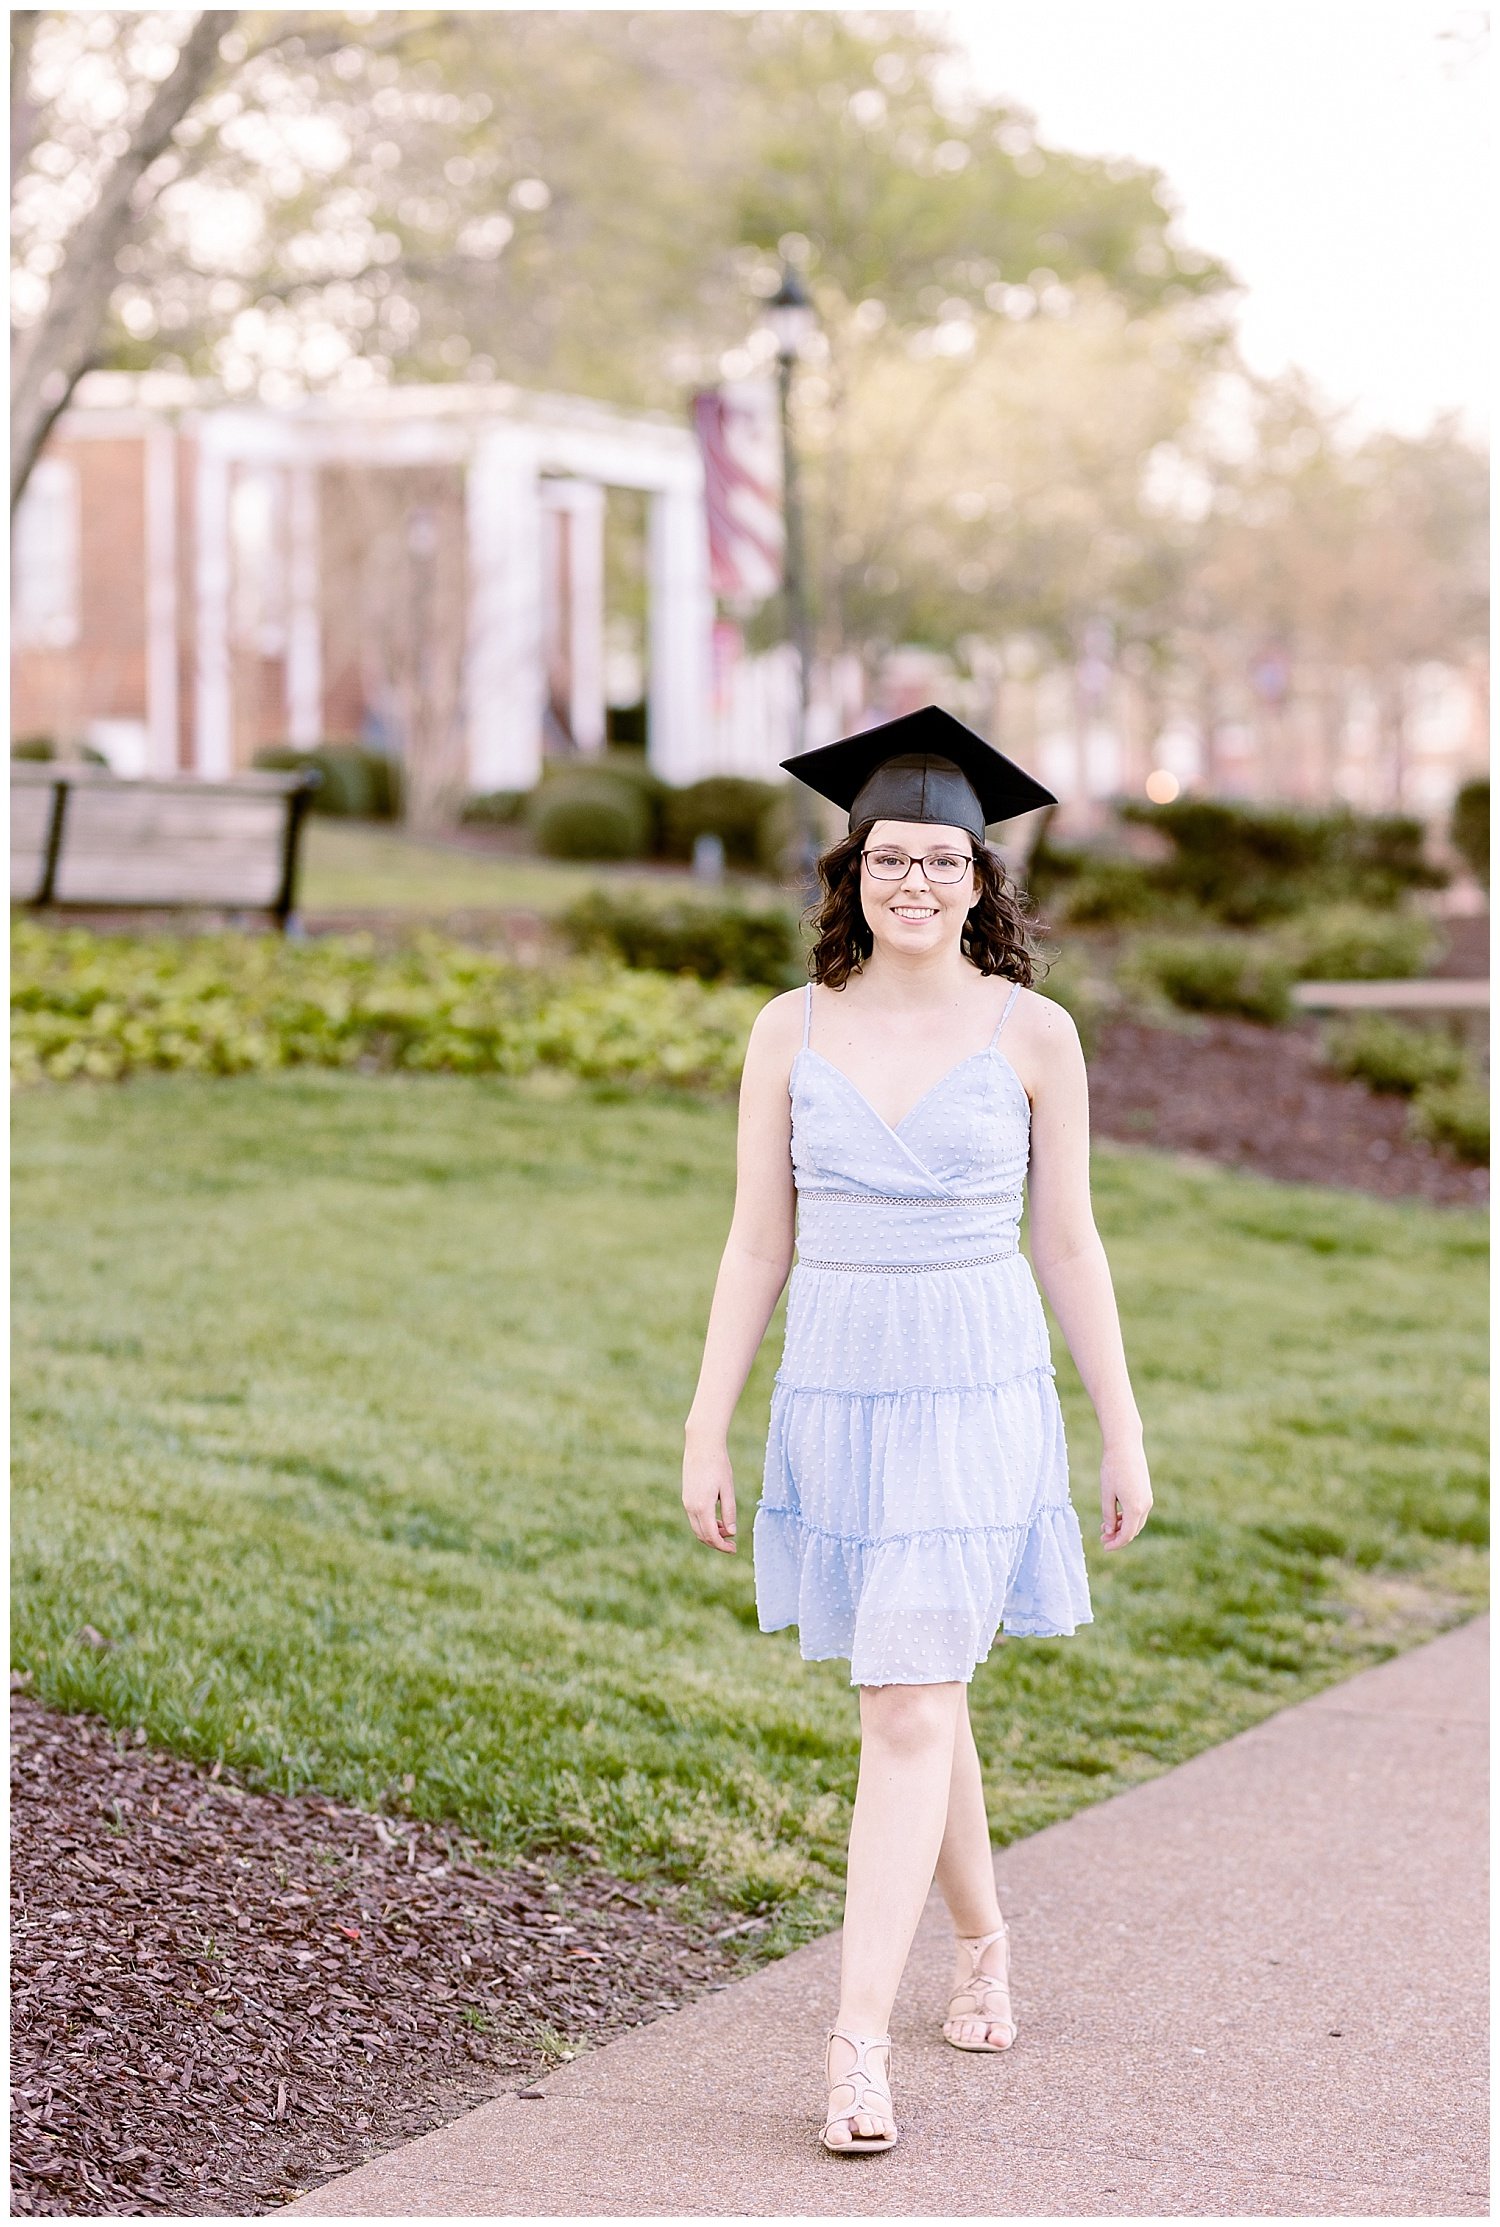 college girl wearing a graduation cap and walking